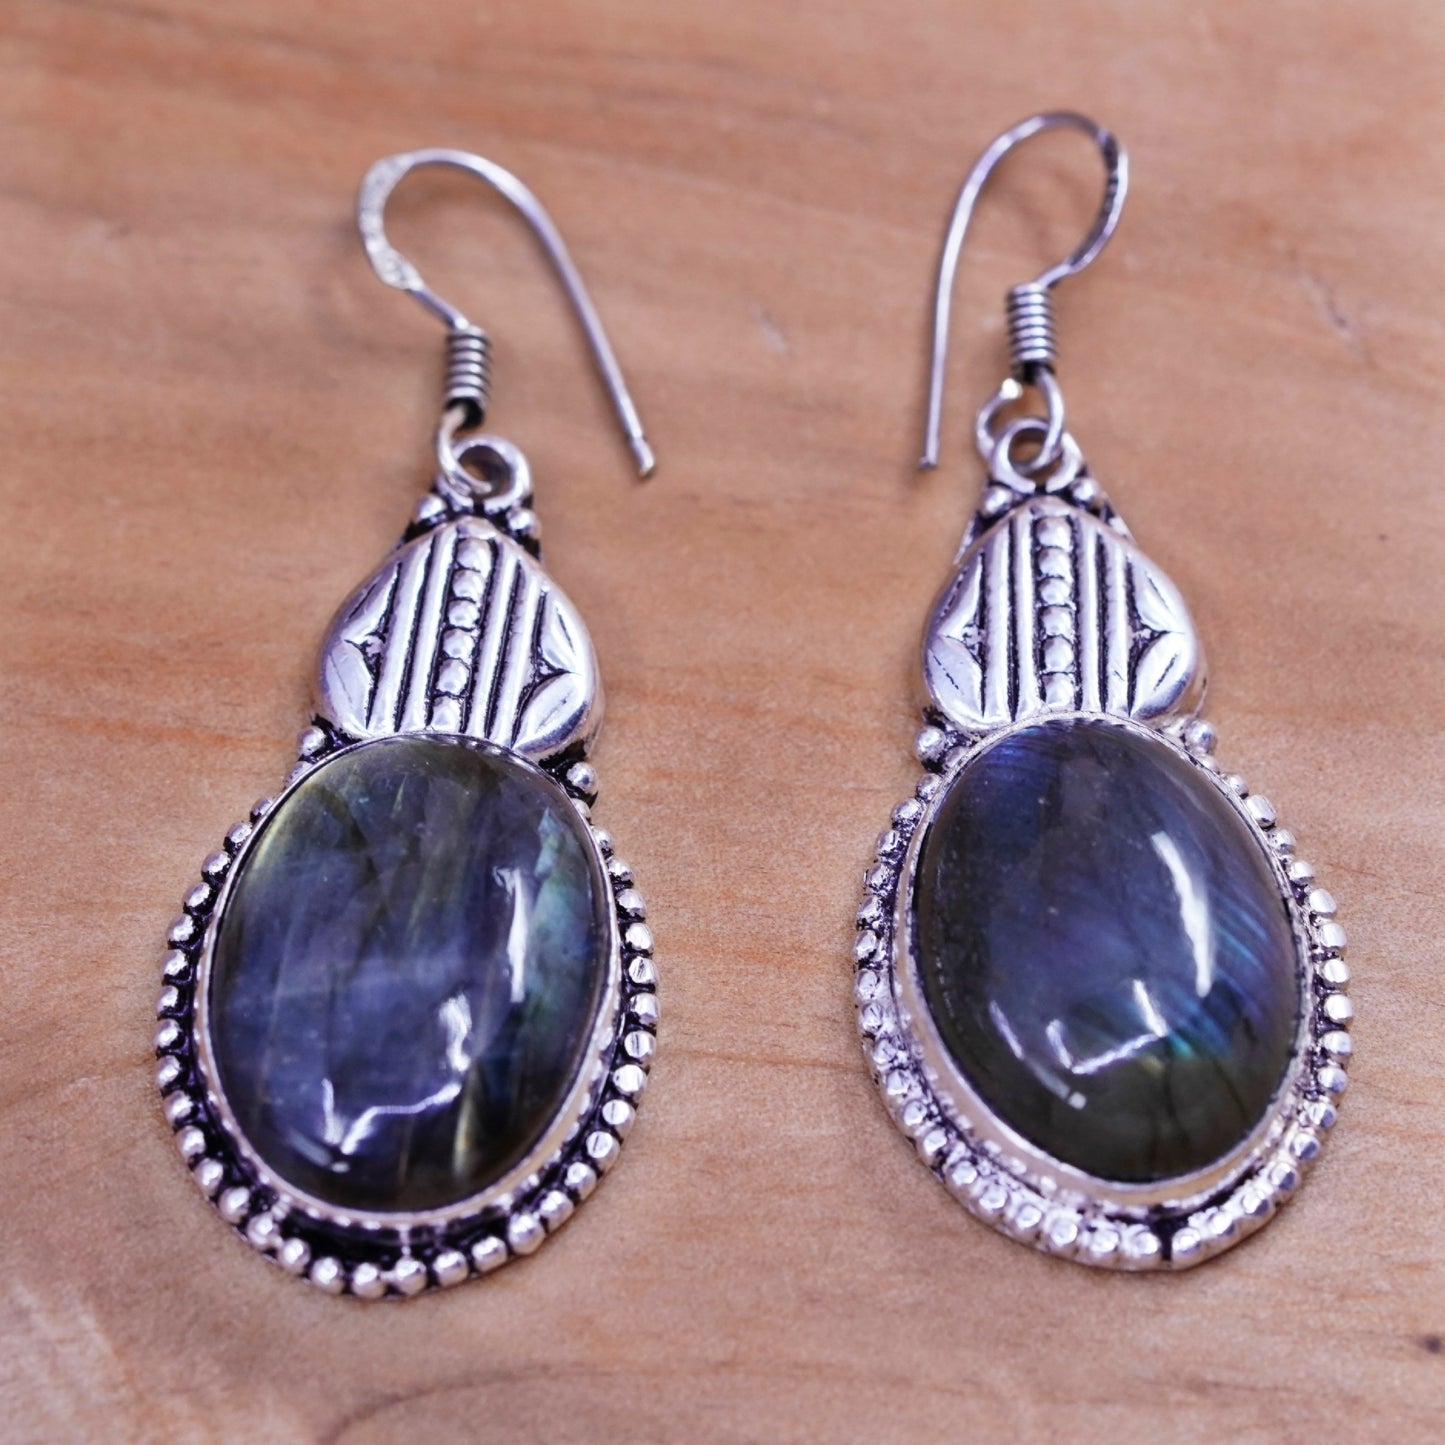 Vintage Sterling 925 silver handmade earrings with oval labradorite and beads